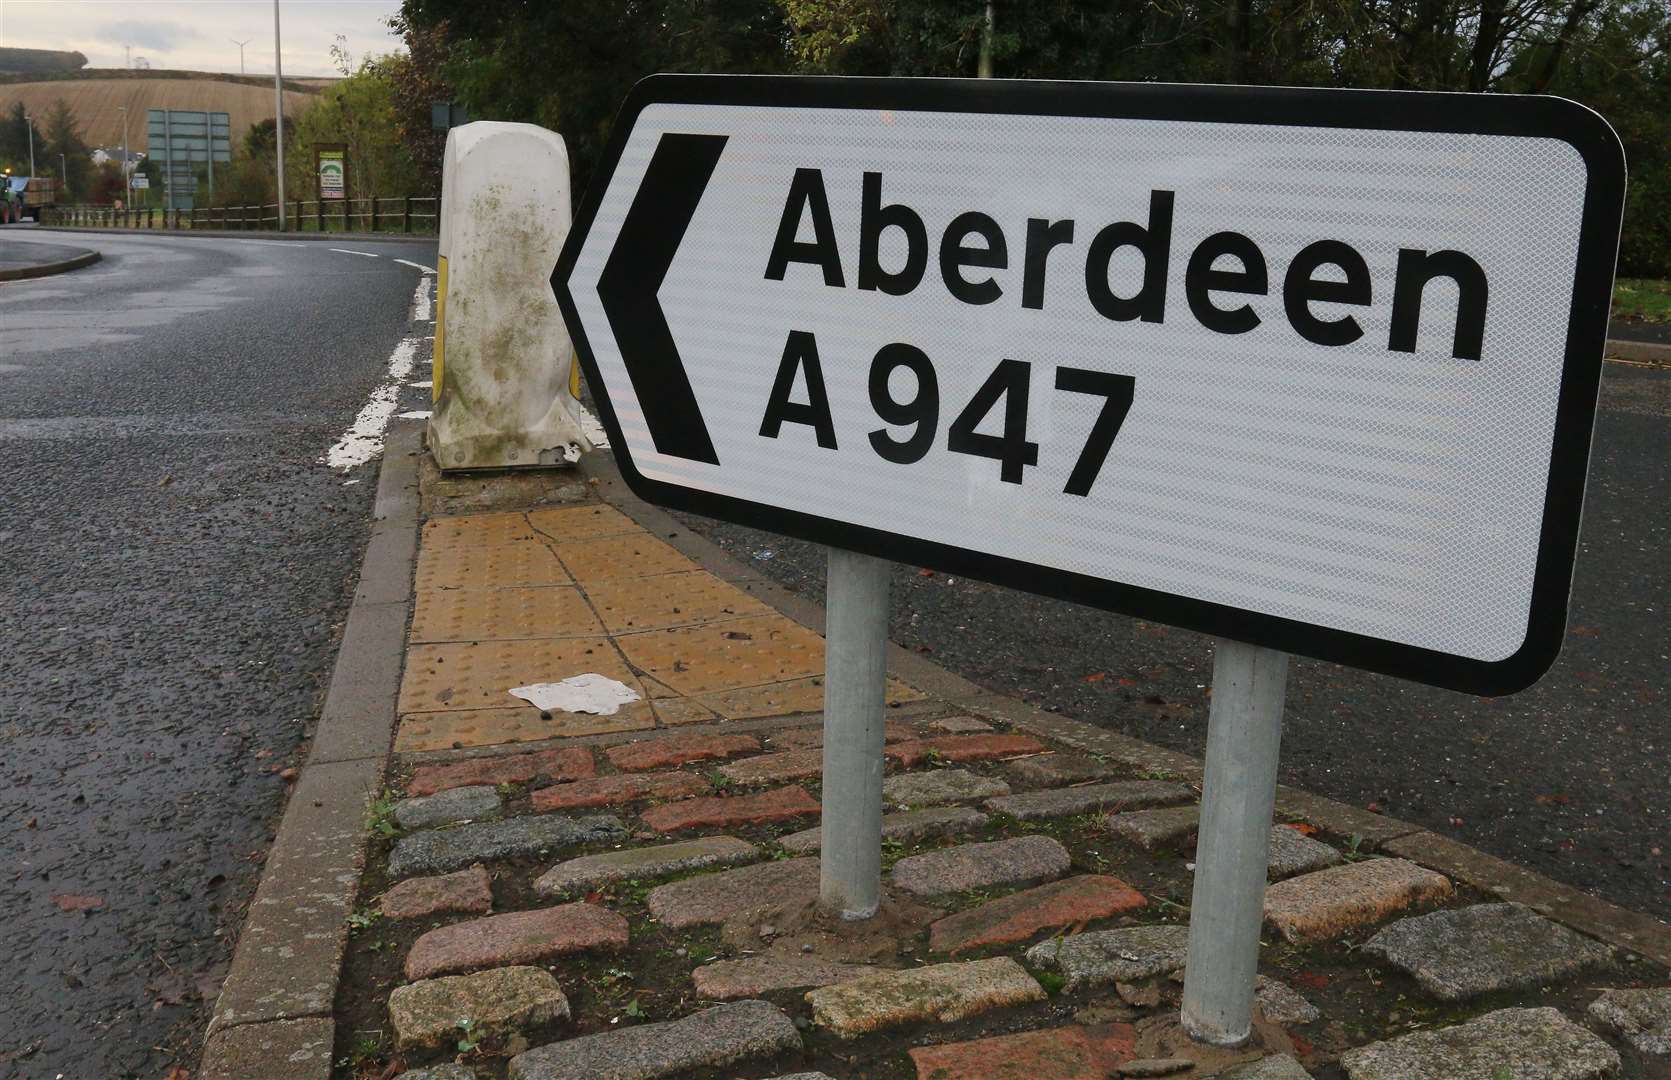 The A947 has a chequered history of road accidents.